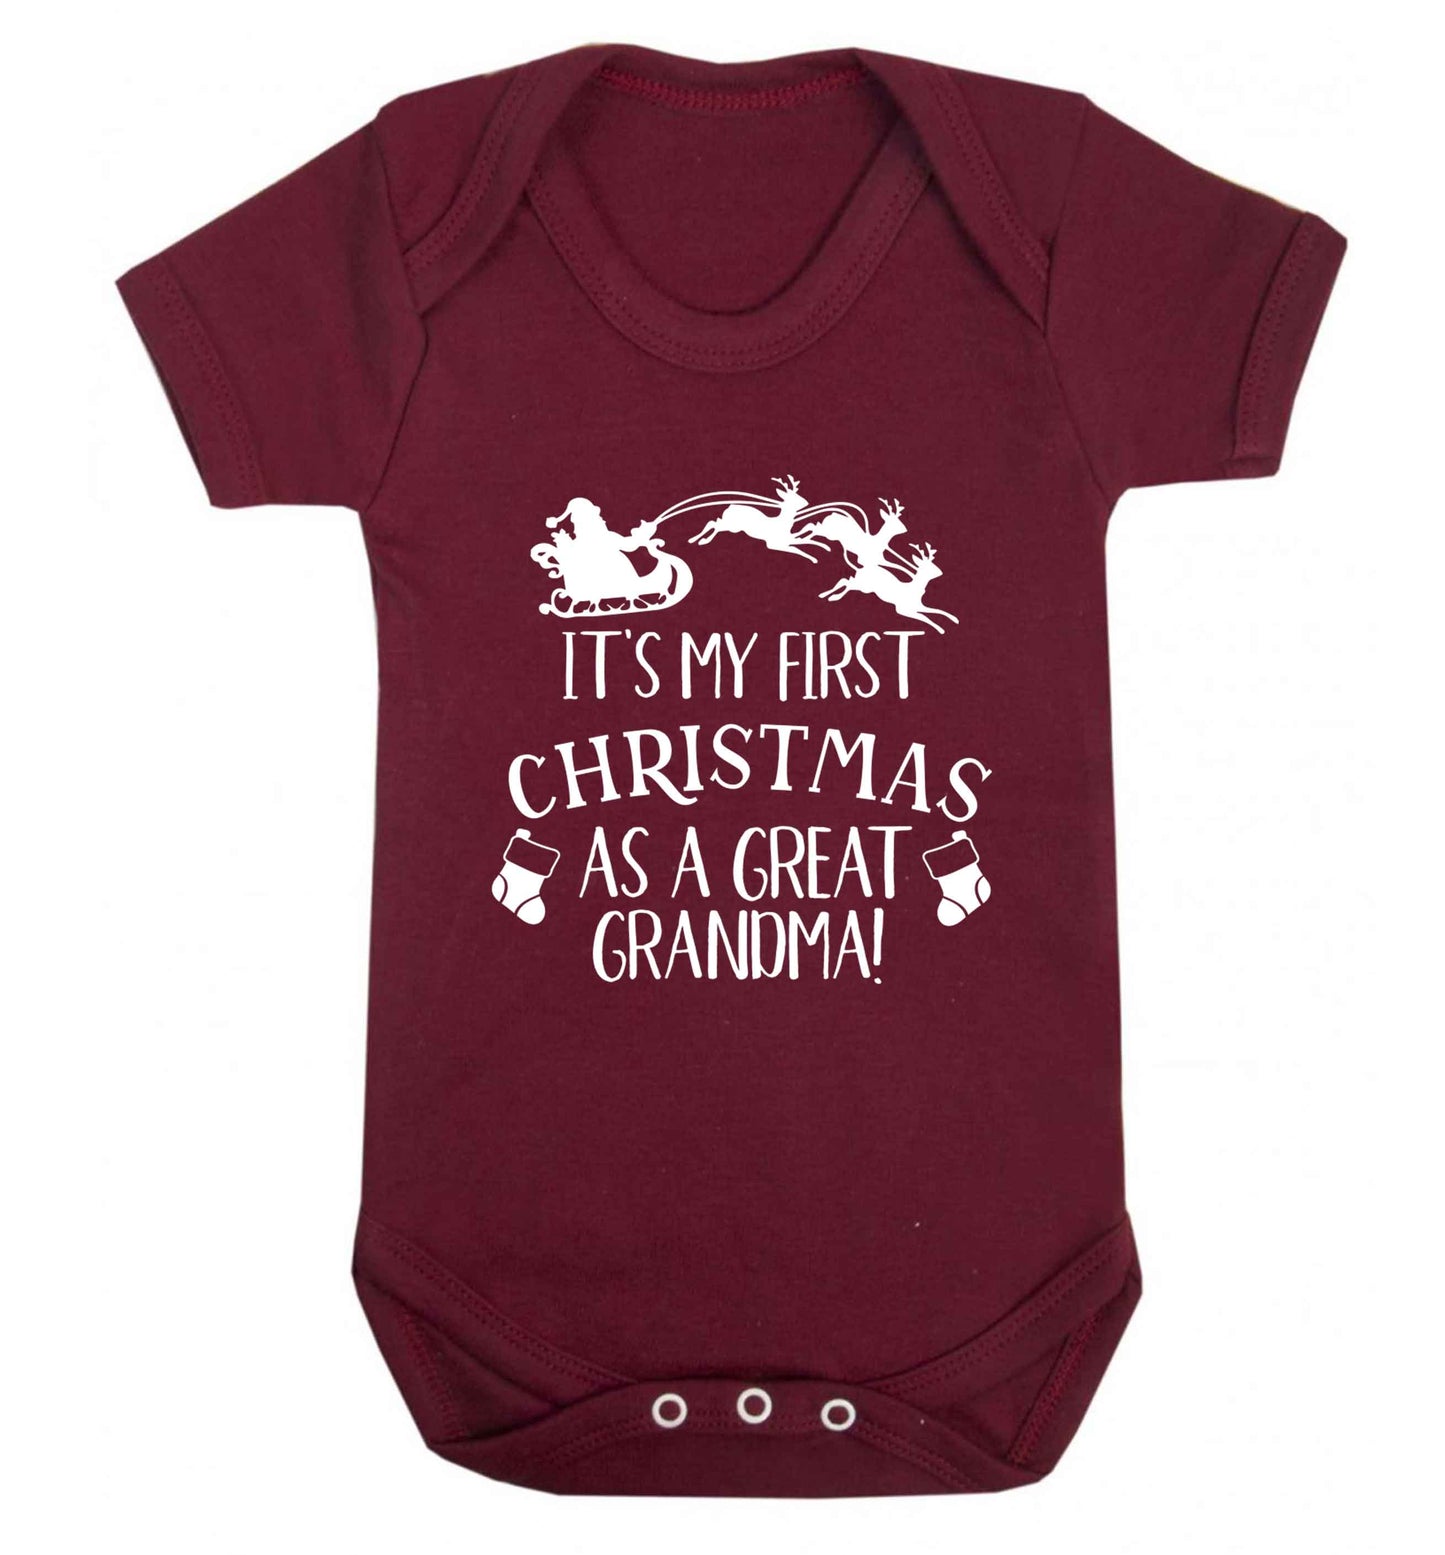 It's my first Christmas as a great grandma! Baby Vest maroon 18-24 months